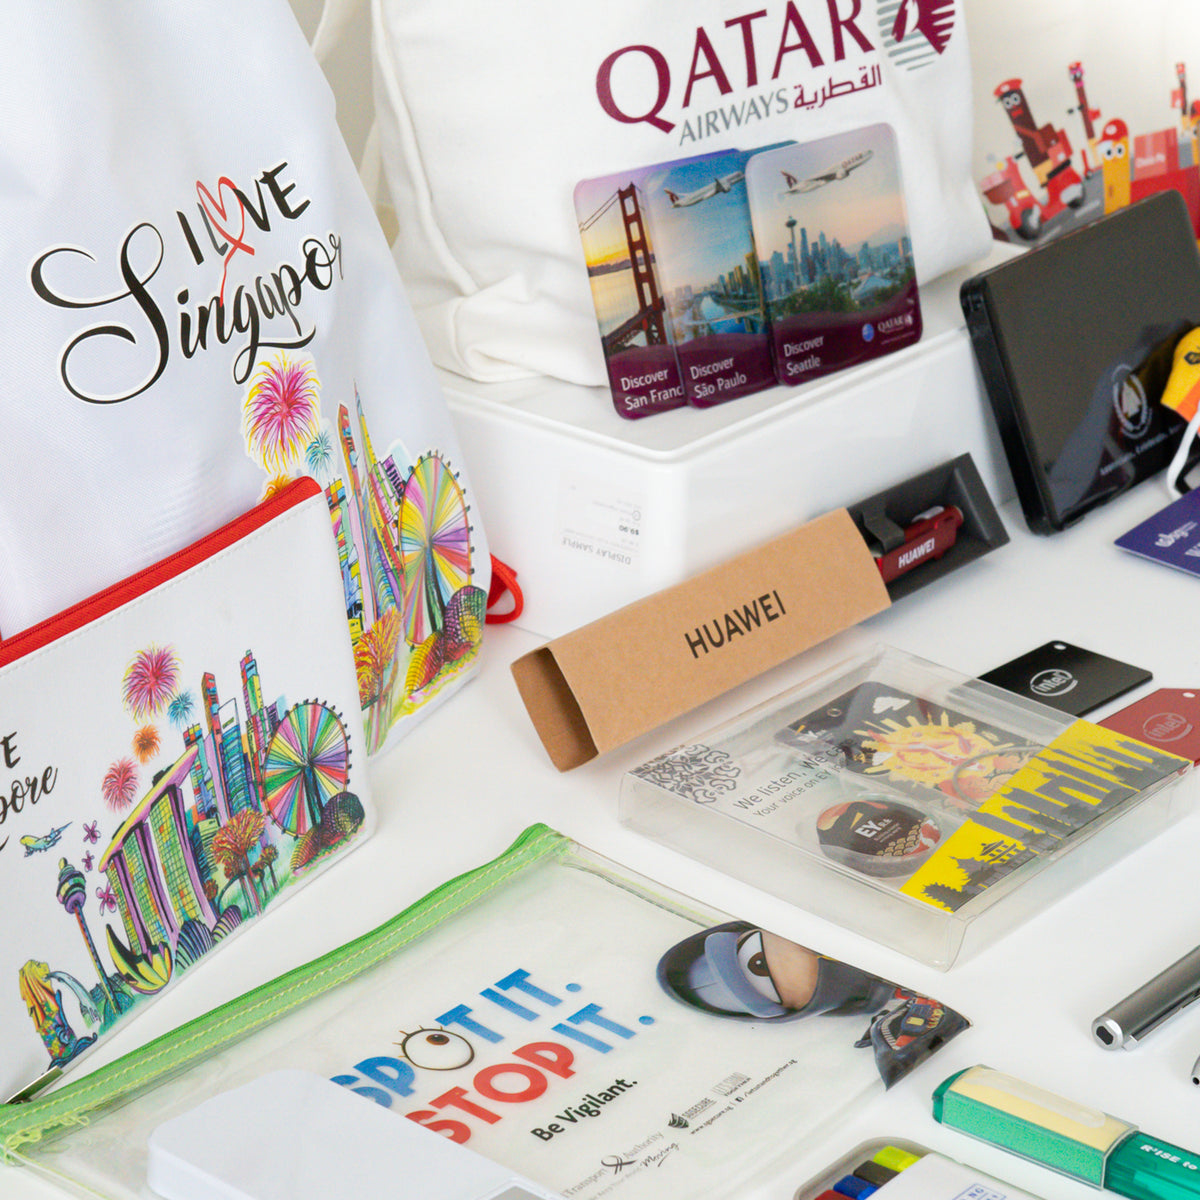 Swag Bag Ideas for Corporate Events | Cvent Blog